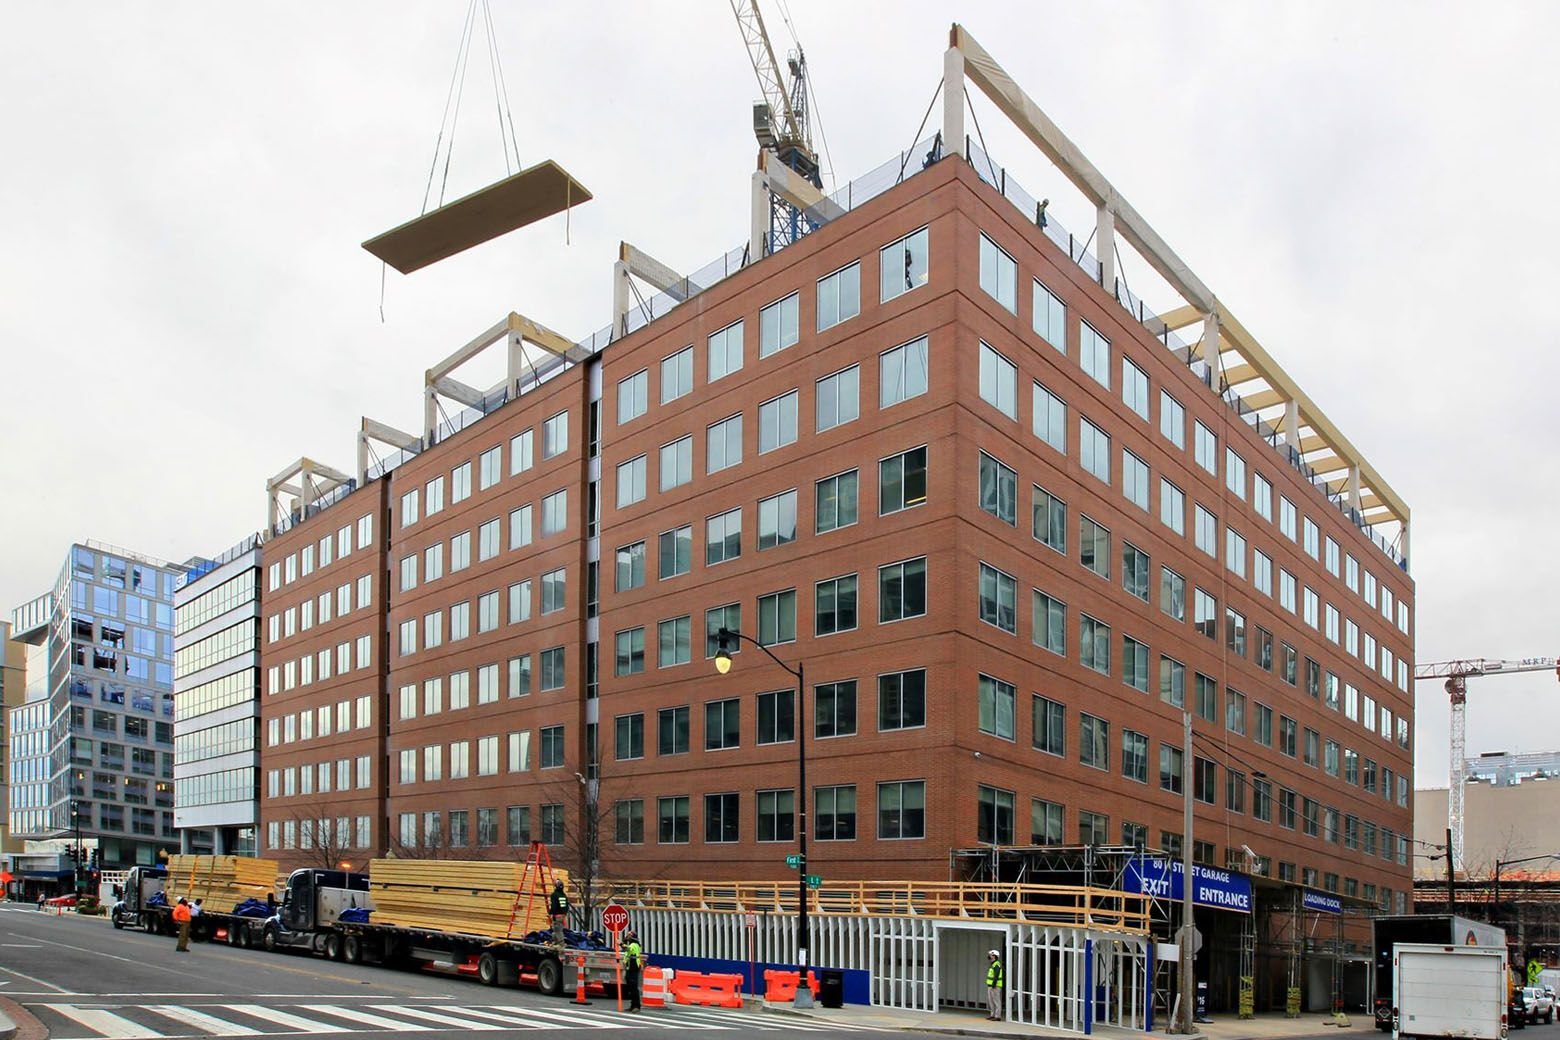 Construction underway on the timber-topped addition to the office building at 80 M Street SE. (Courtesy Maurice Harrington, Sisson Studios)